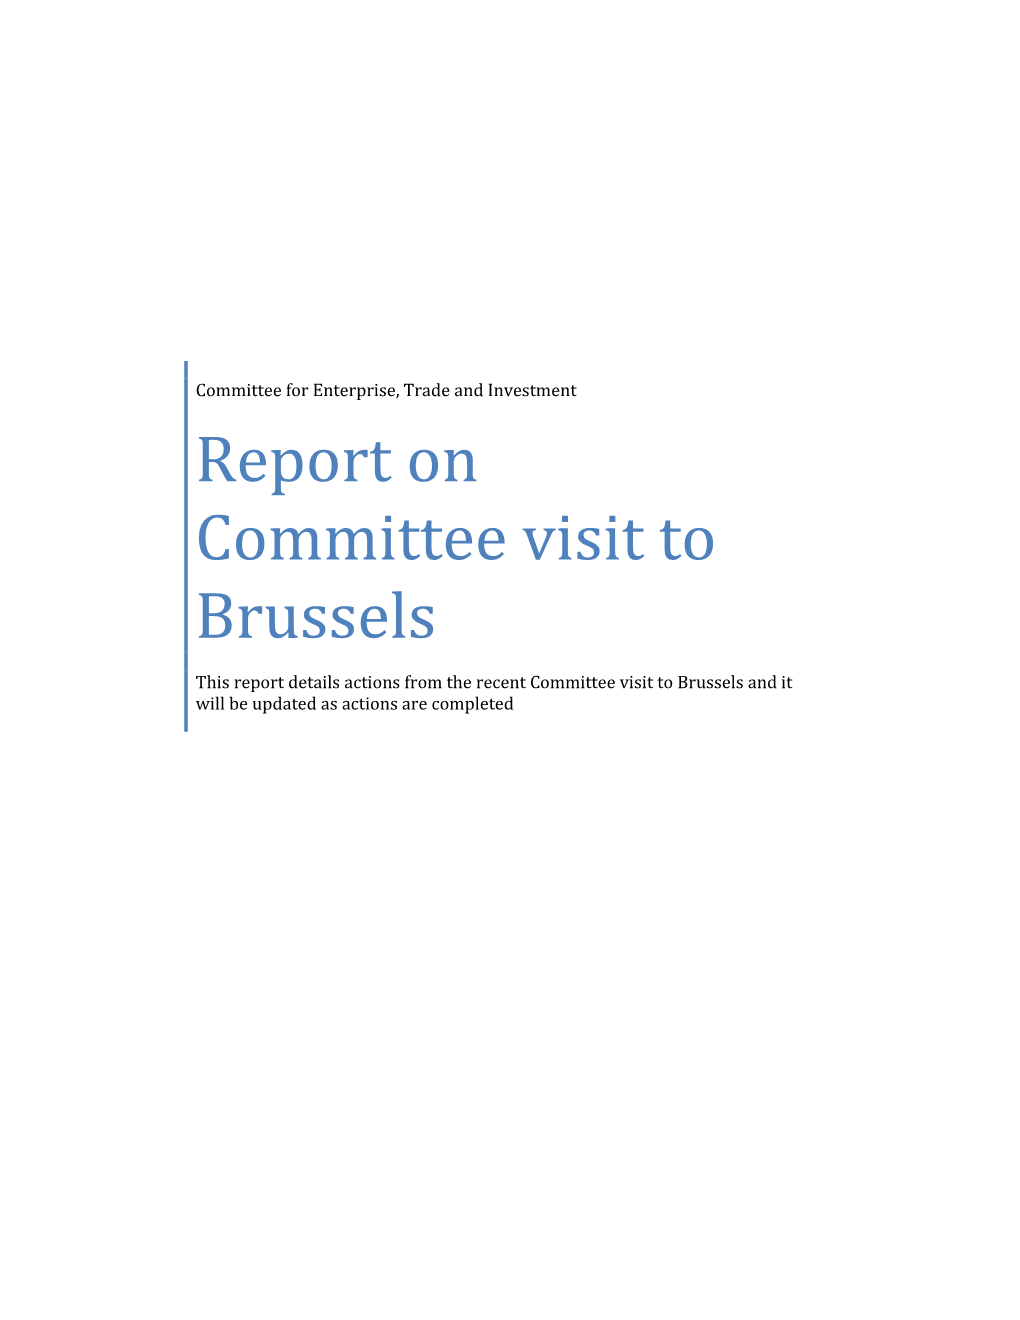 Report on Committee Visit to Brussels